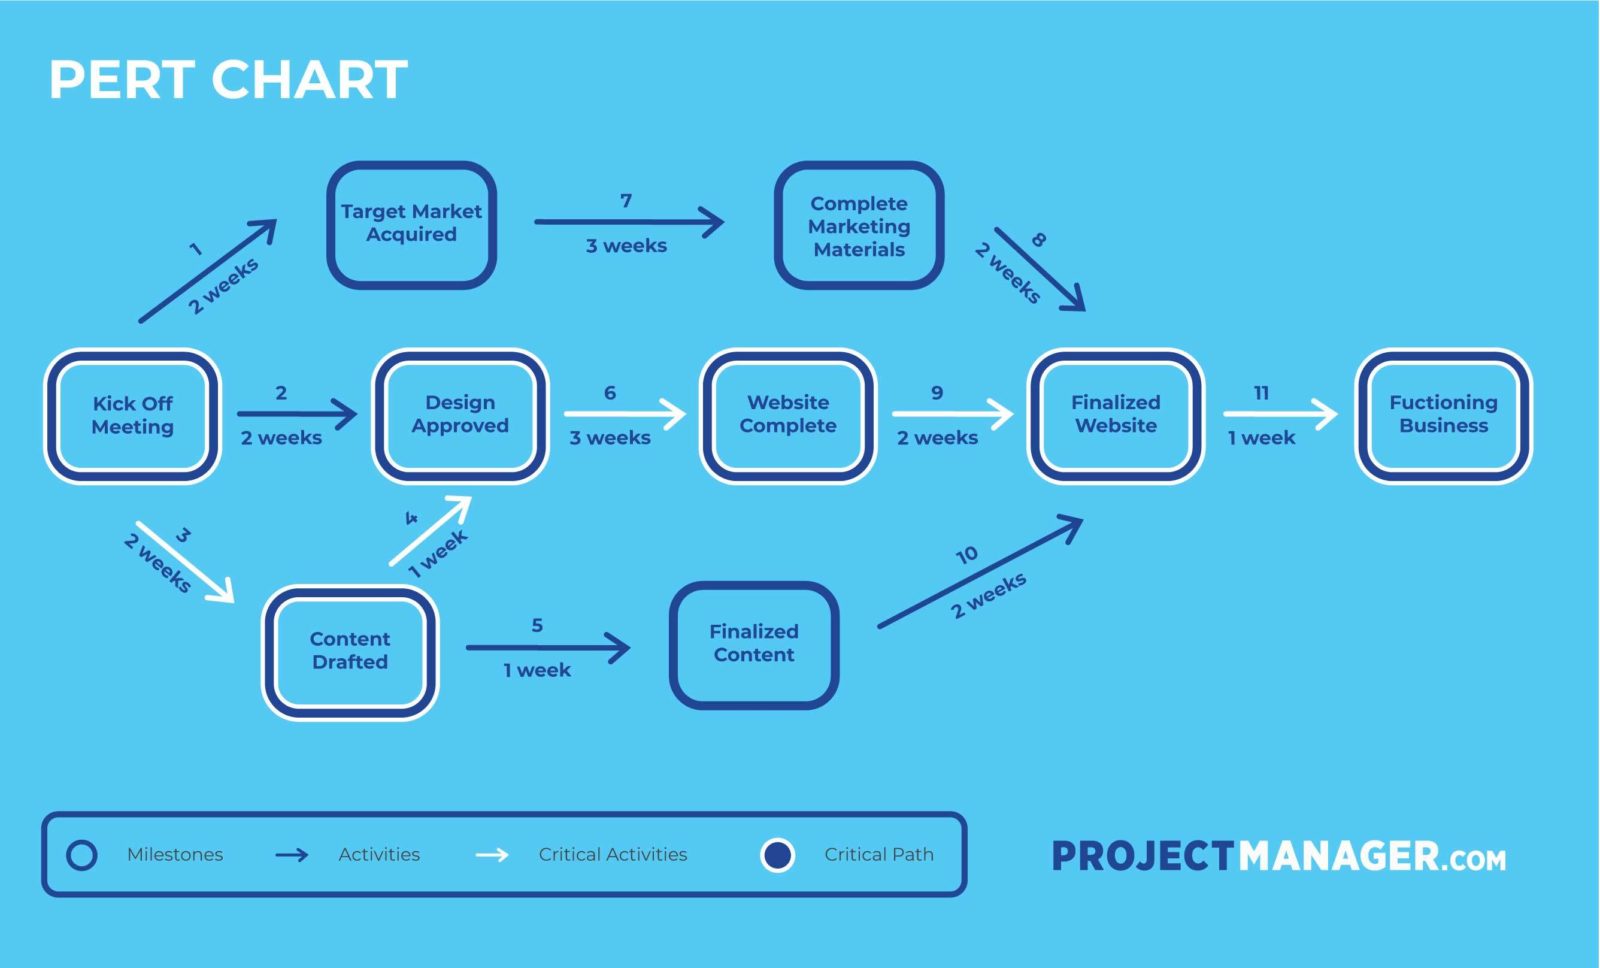 How to Make a Project Network Diagram (Free Tools & Examples Included